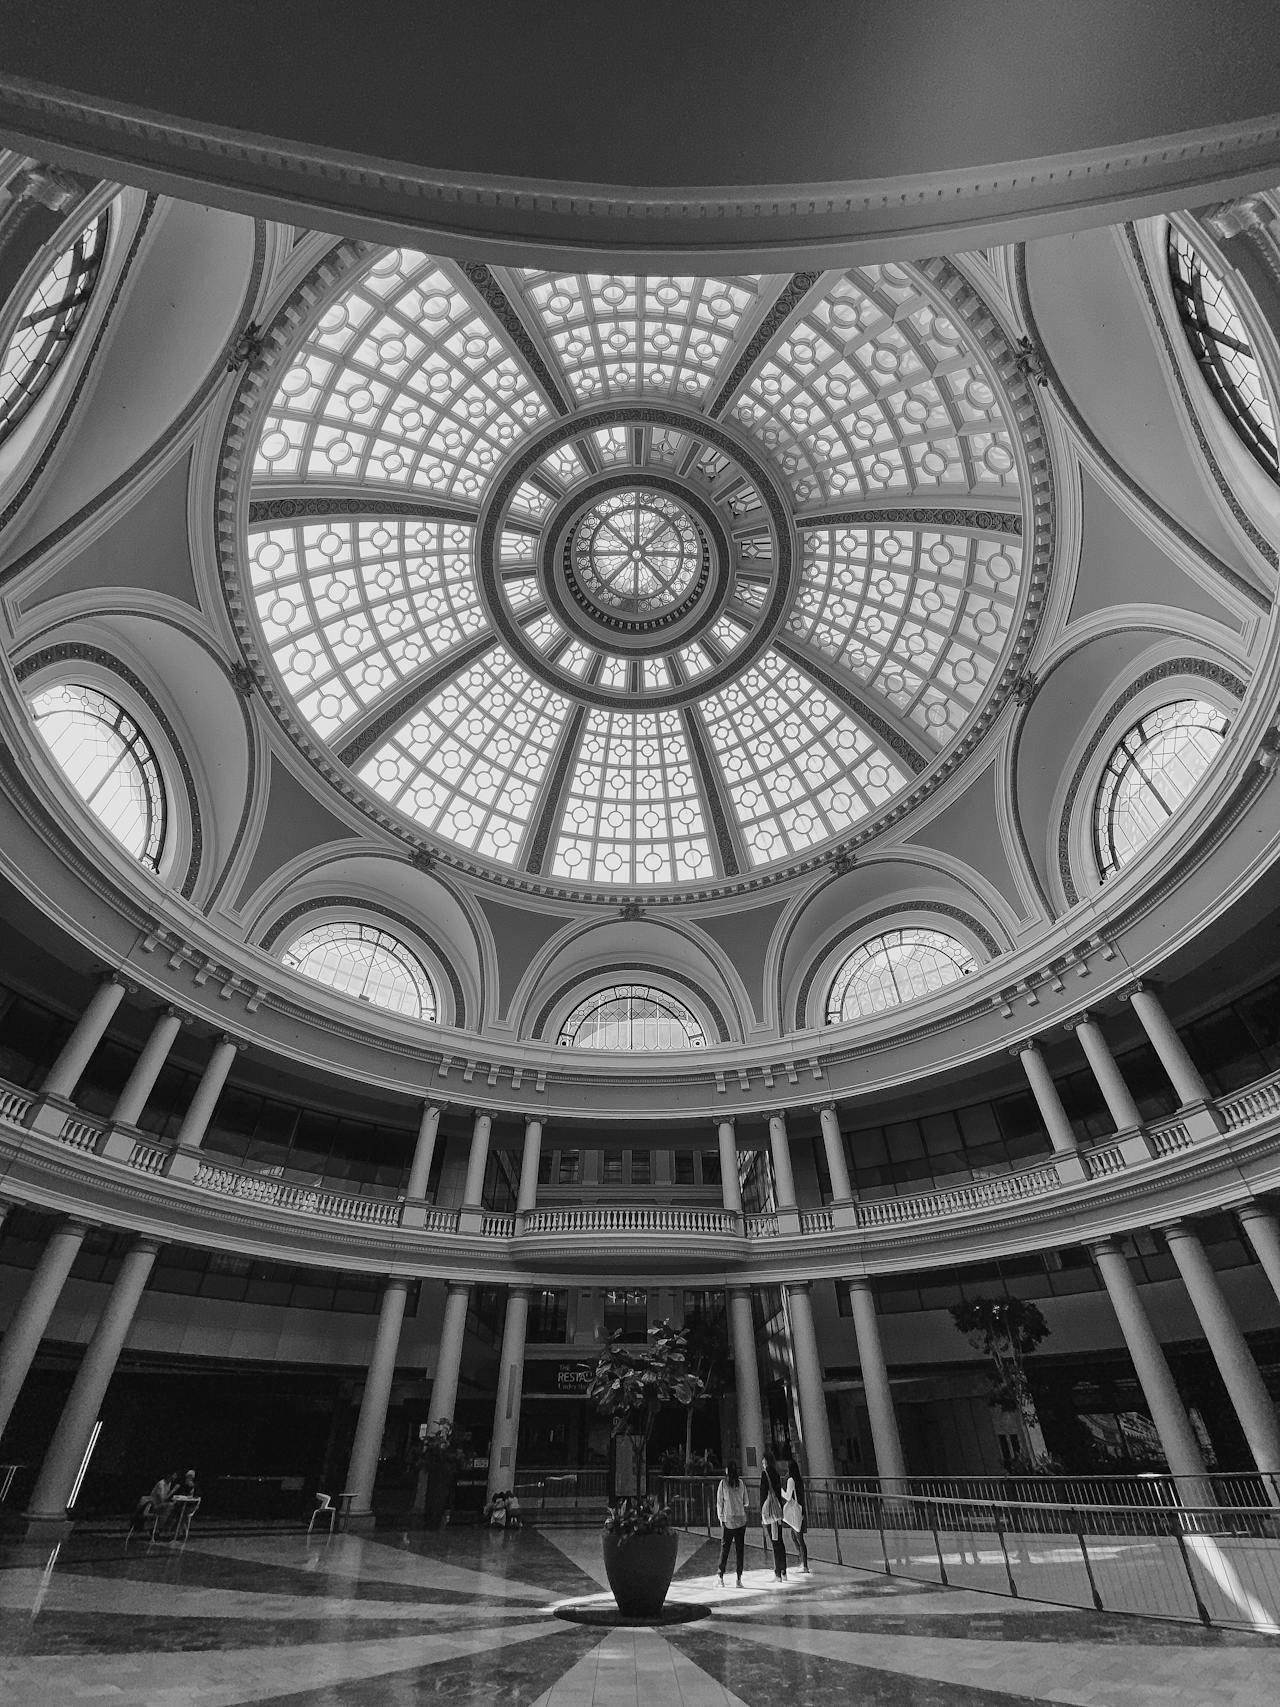 View of the famous dome at Westfield Mall